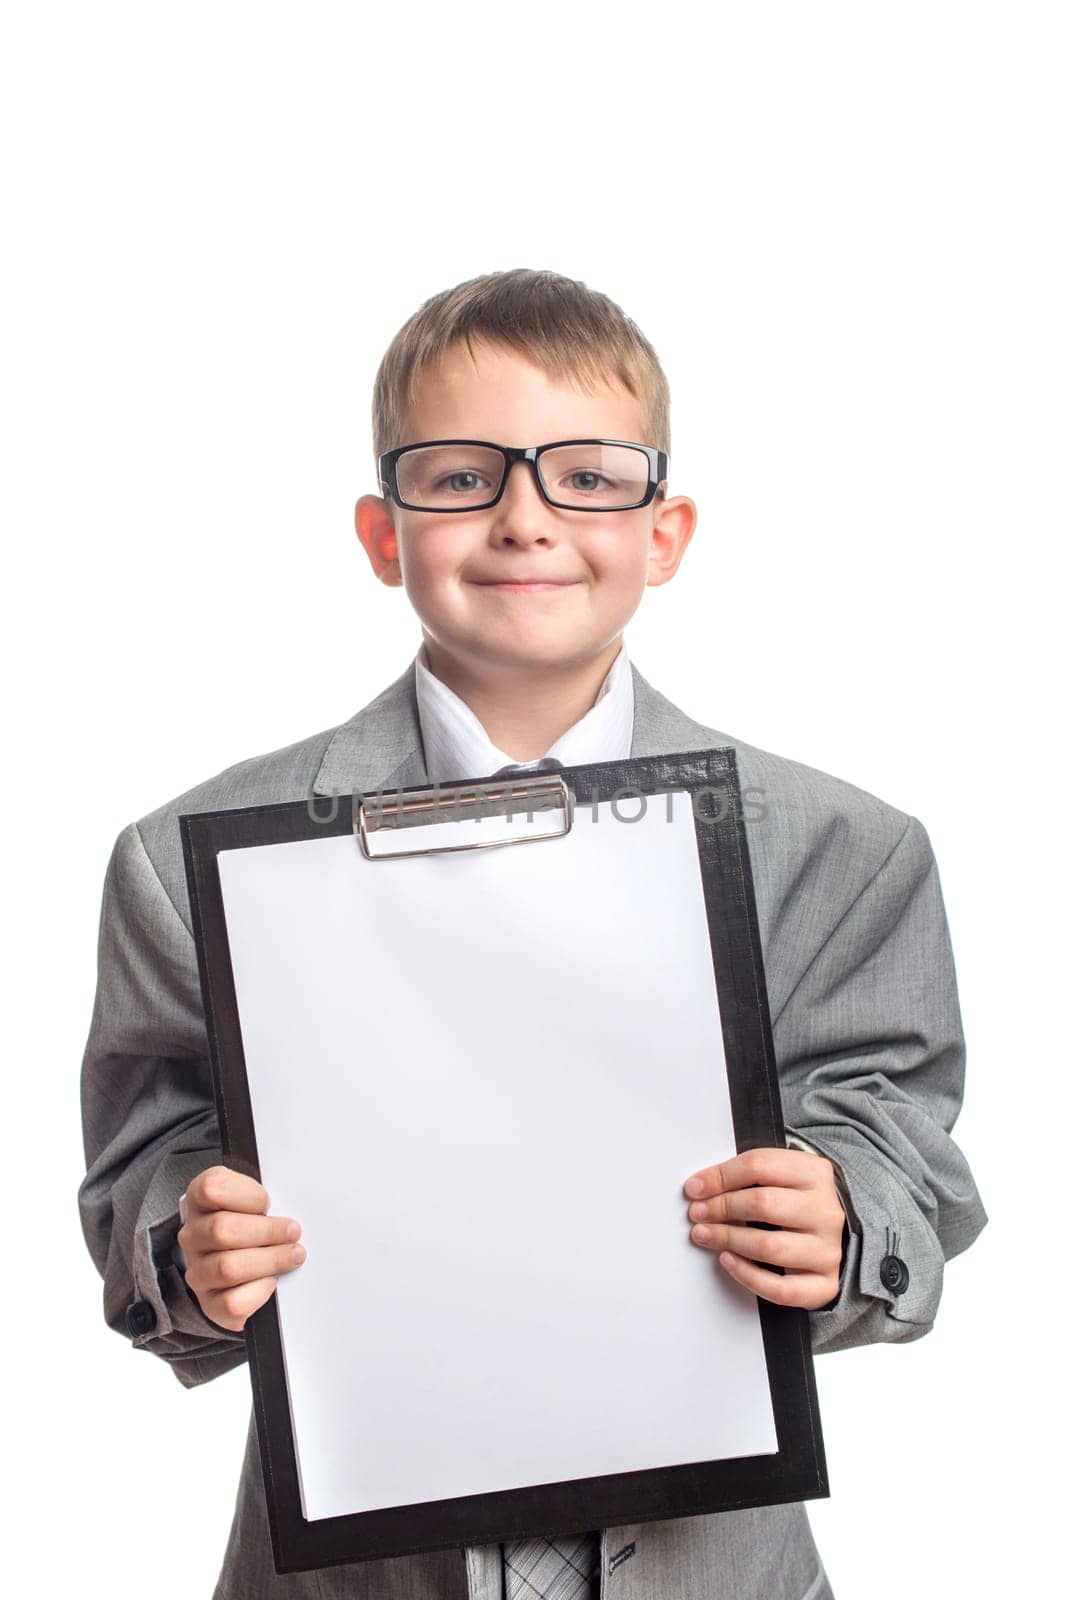 Little cute boy in glasses and a tablet in his hands dressed in a gray suit with a tie on a white background. Advertising of educational courses, advanced training.